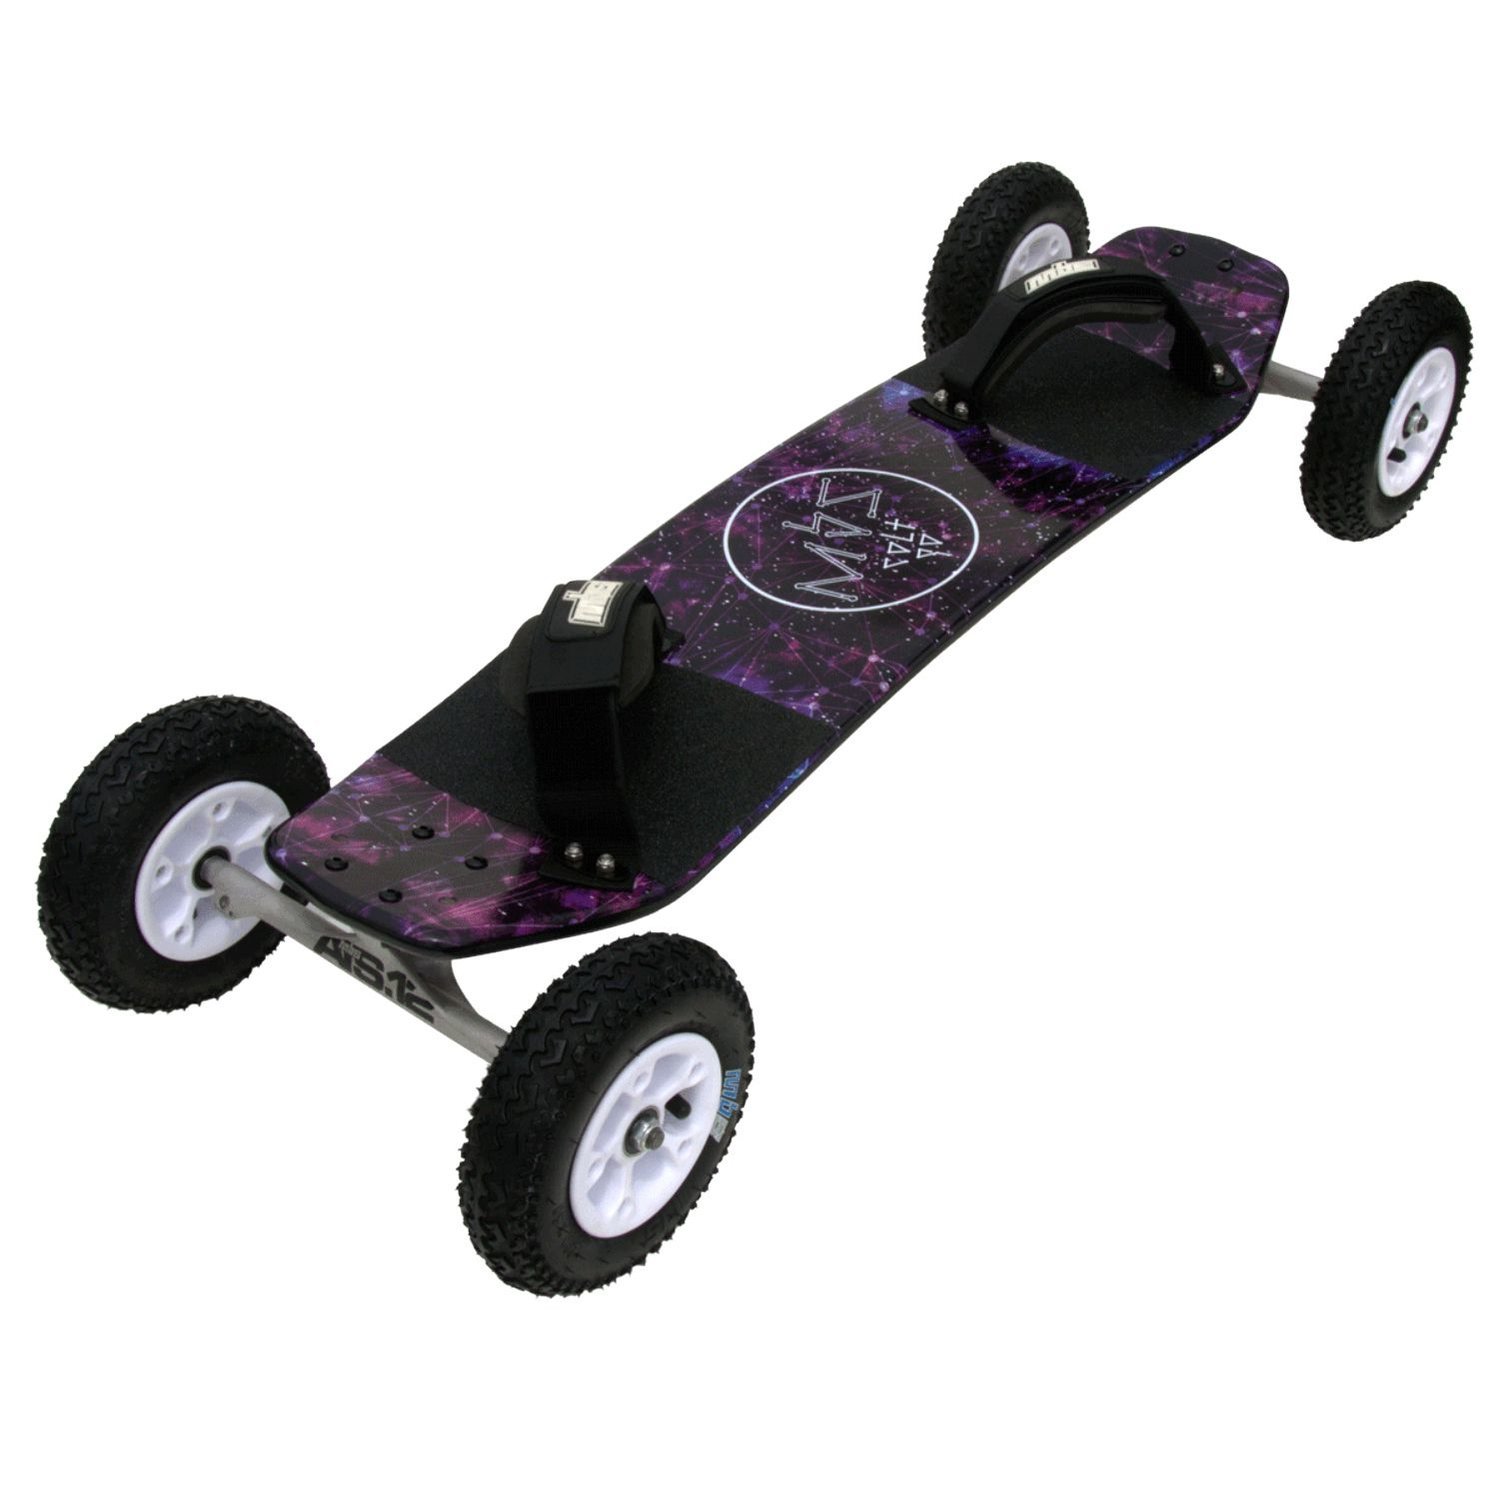 Image of MBS Colt 90 Mountainboard - Constellation